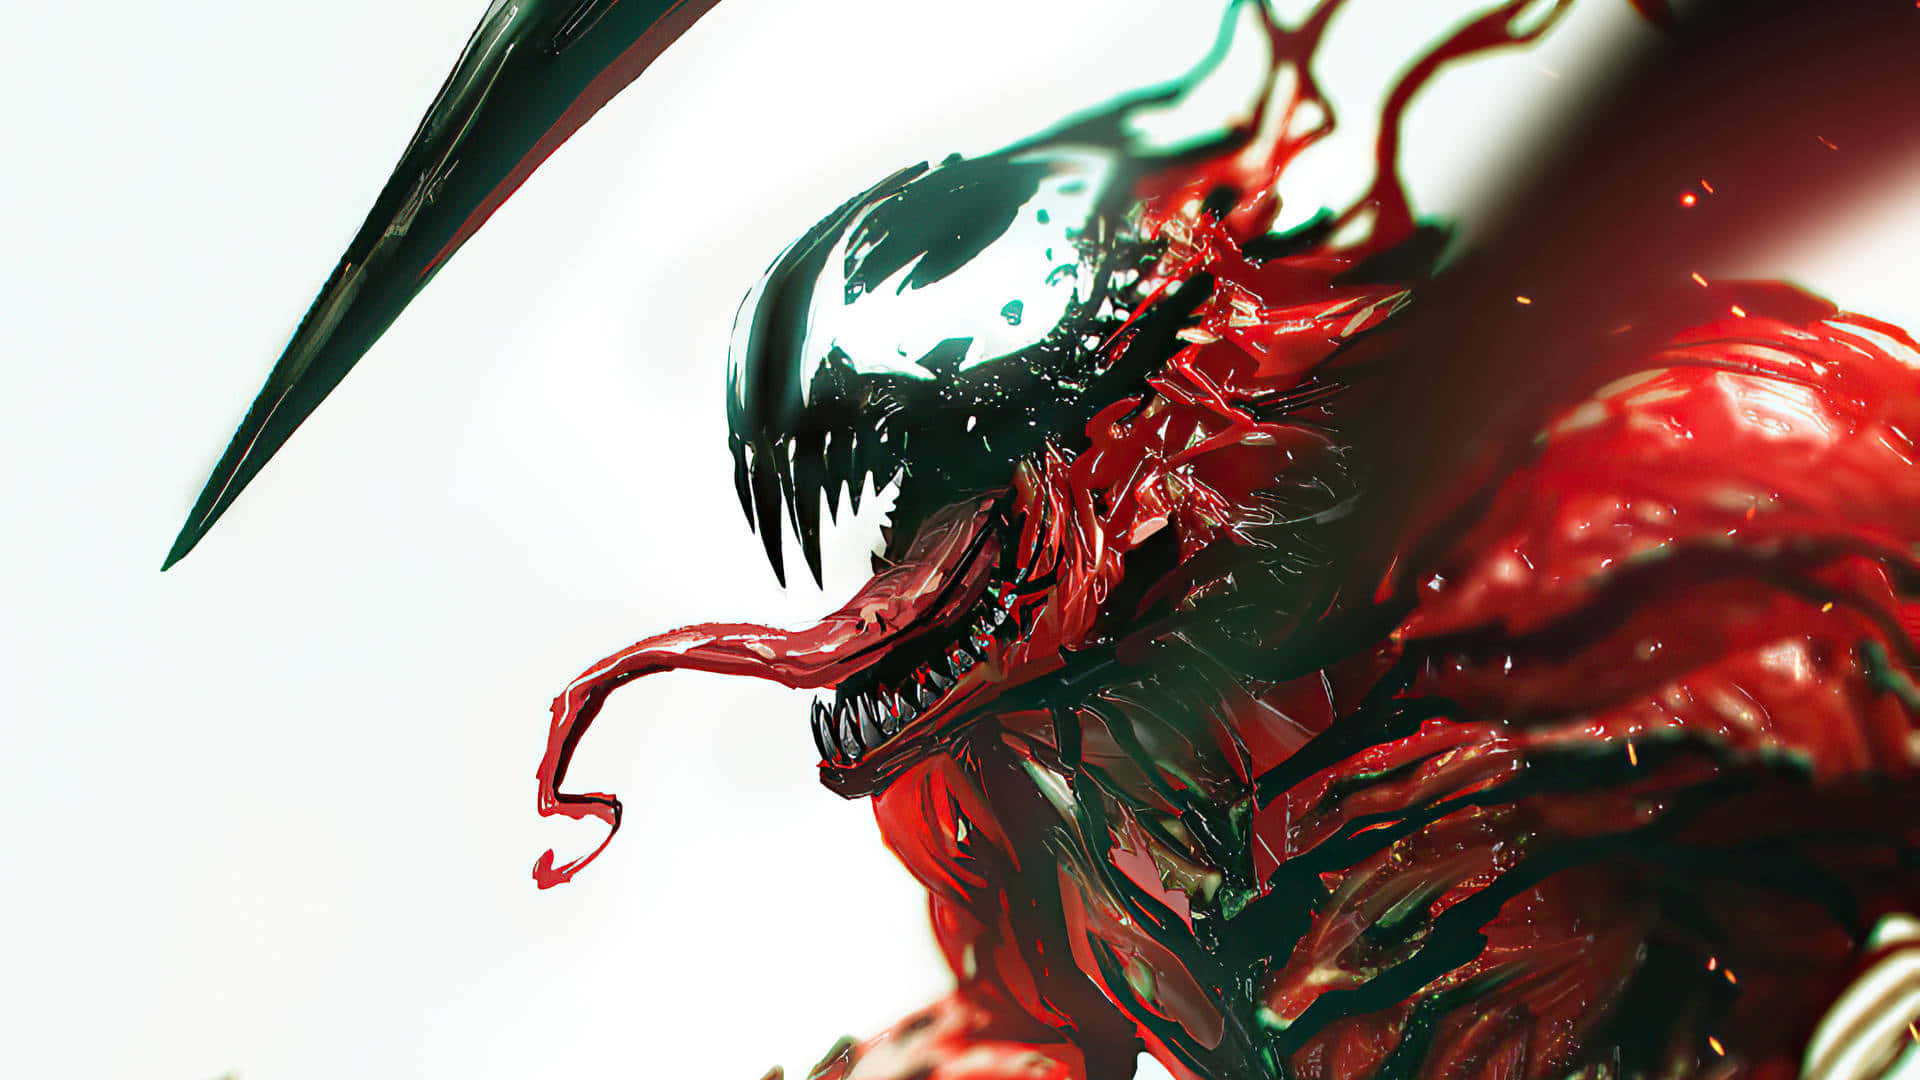 Carnage, the infamous symbiote villain Wallpaper